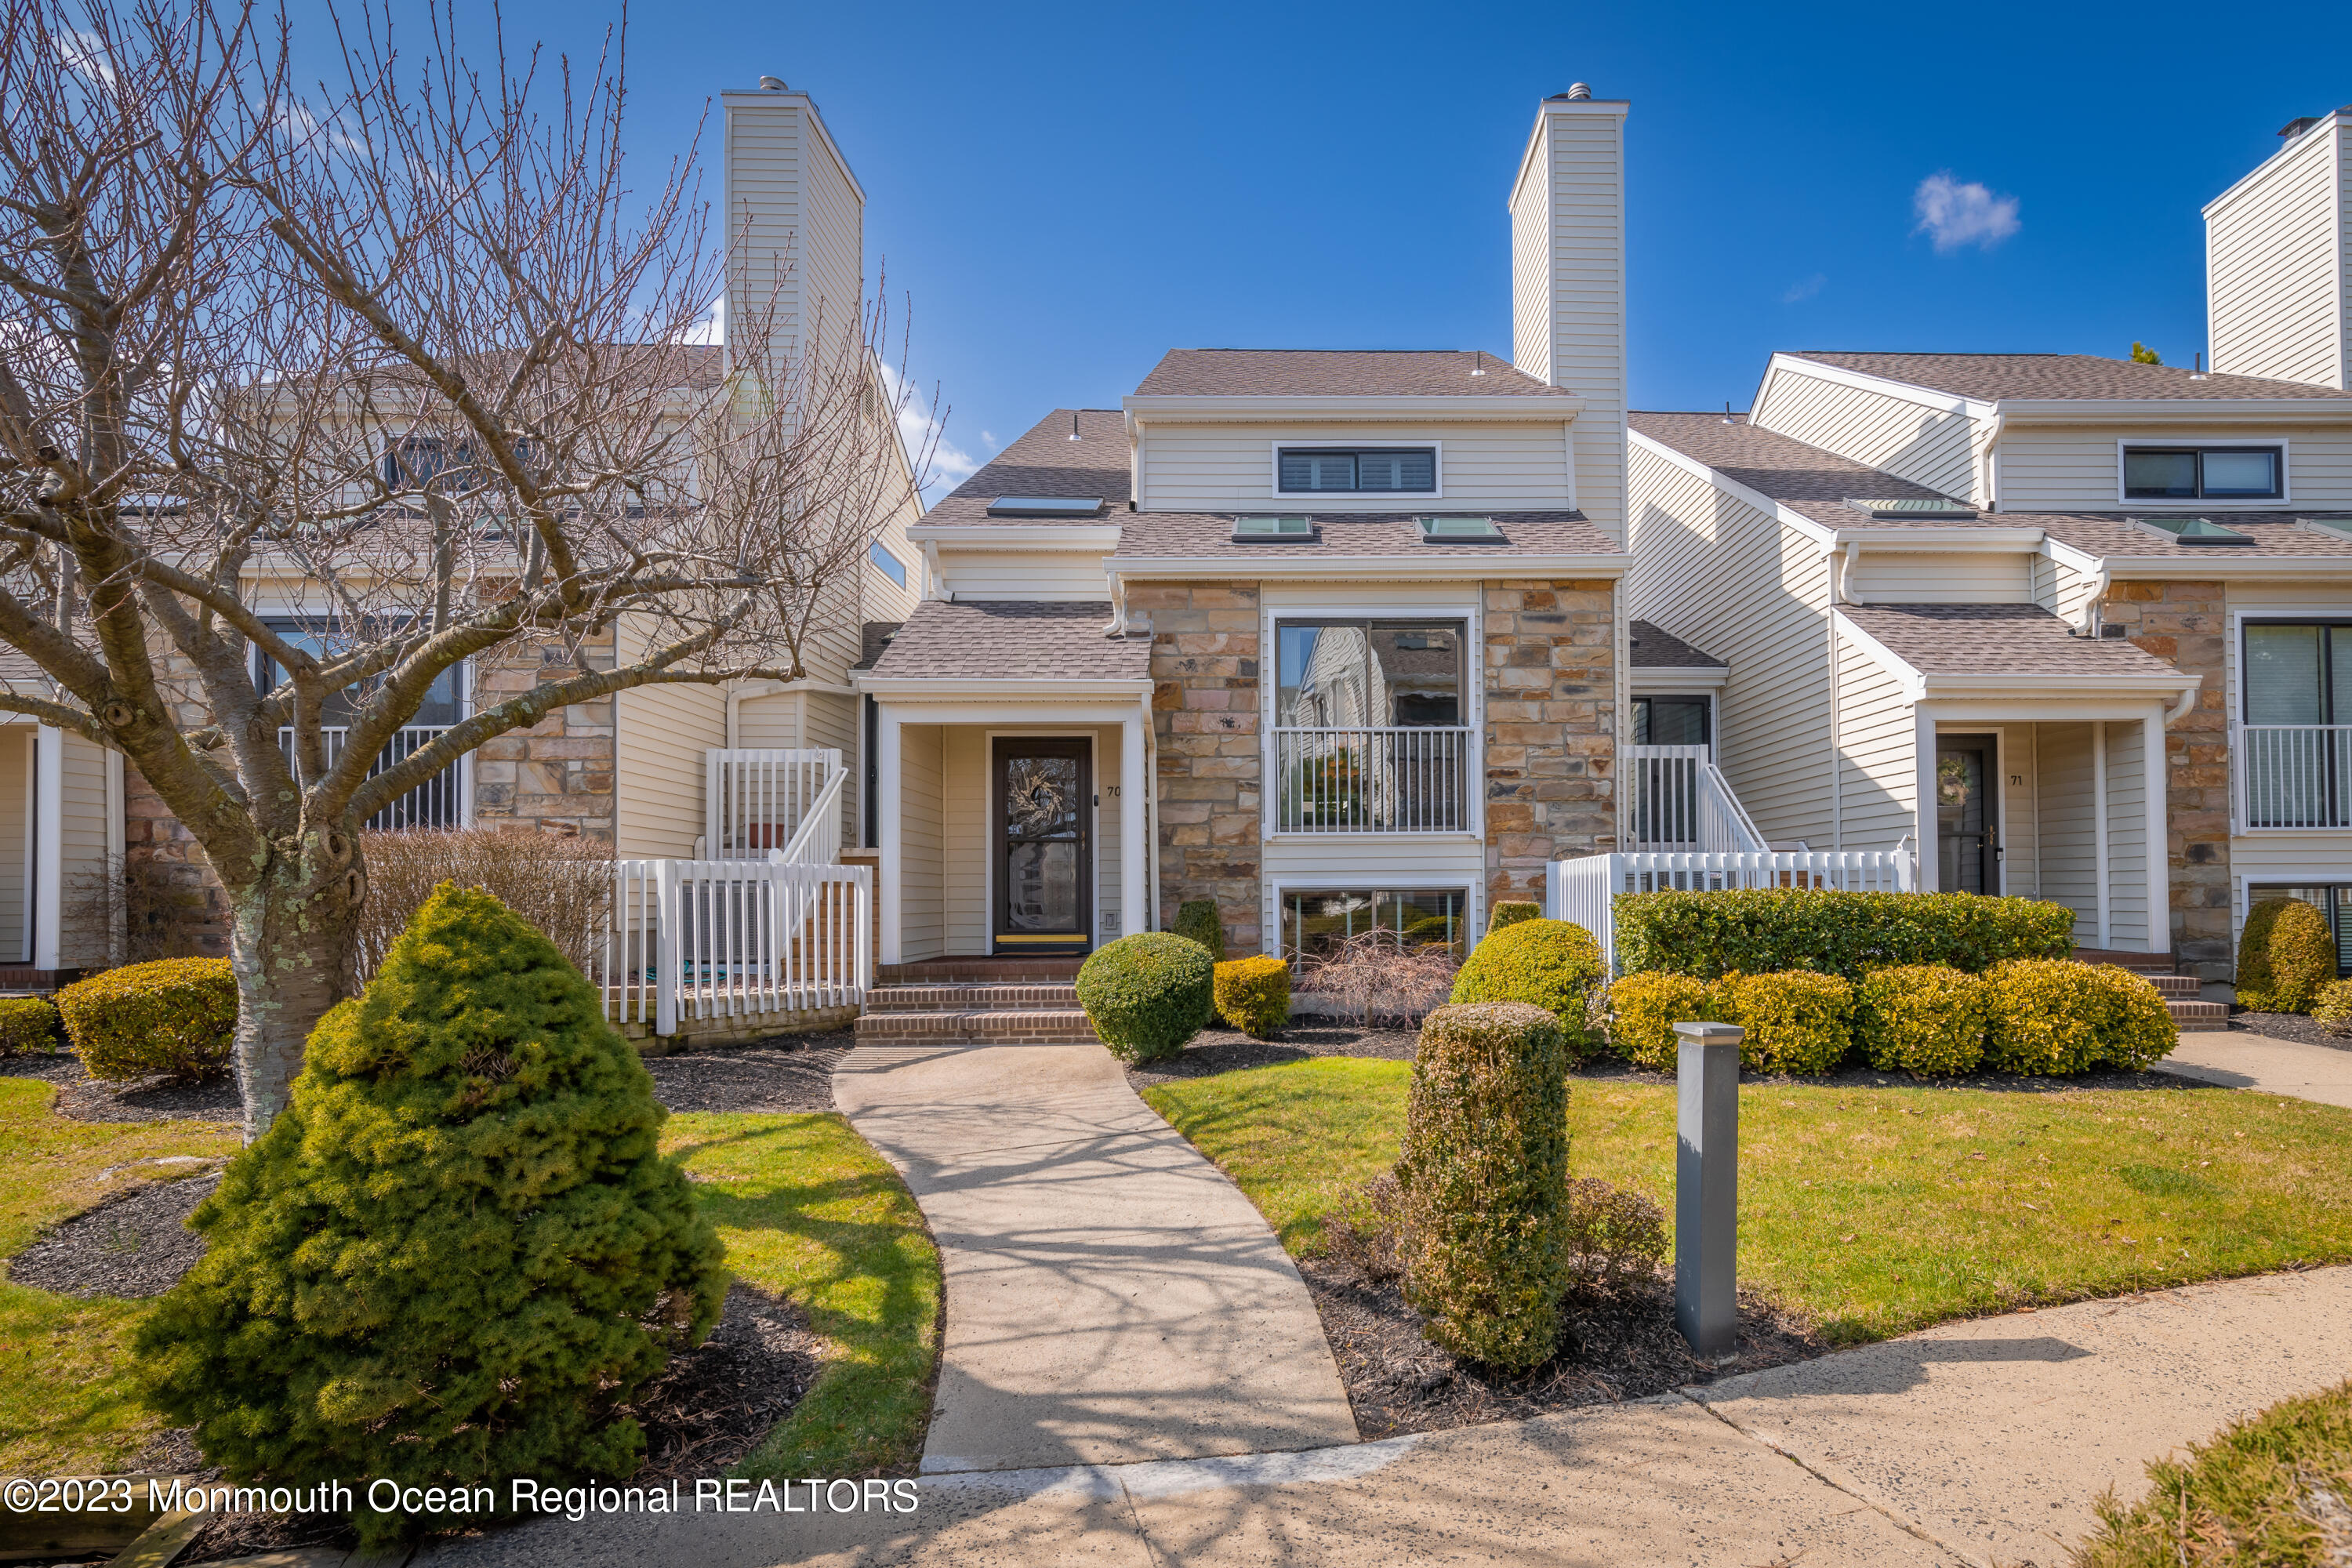 Long Branch, NJ Real Estate Housing Market & Trends | Better Homes and Gardens<sup>®</sup> Real Estate